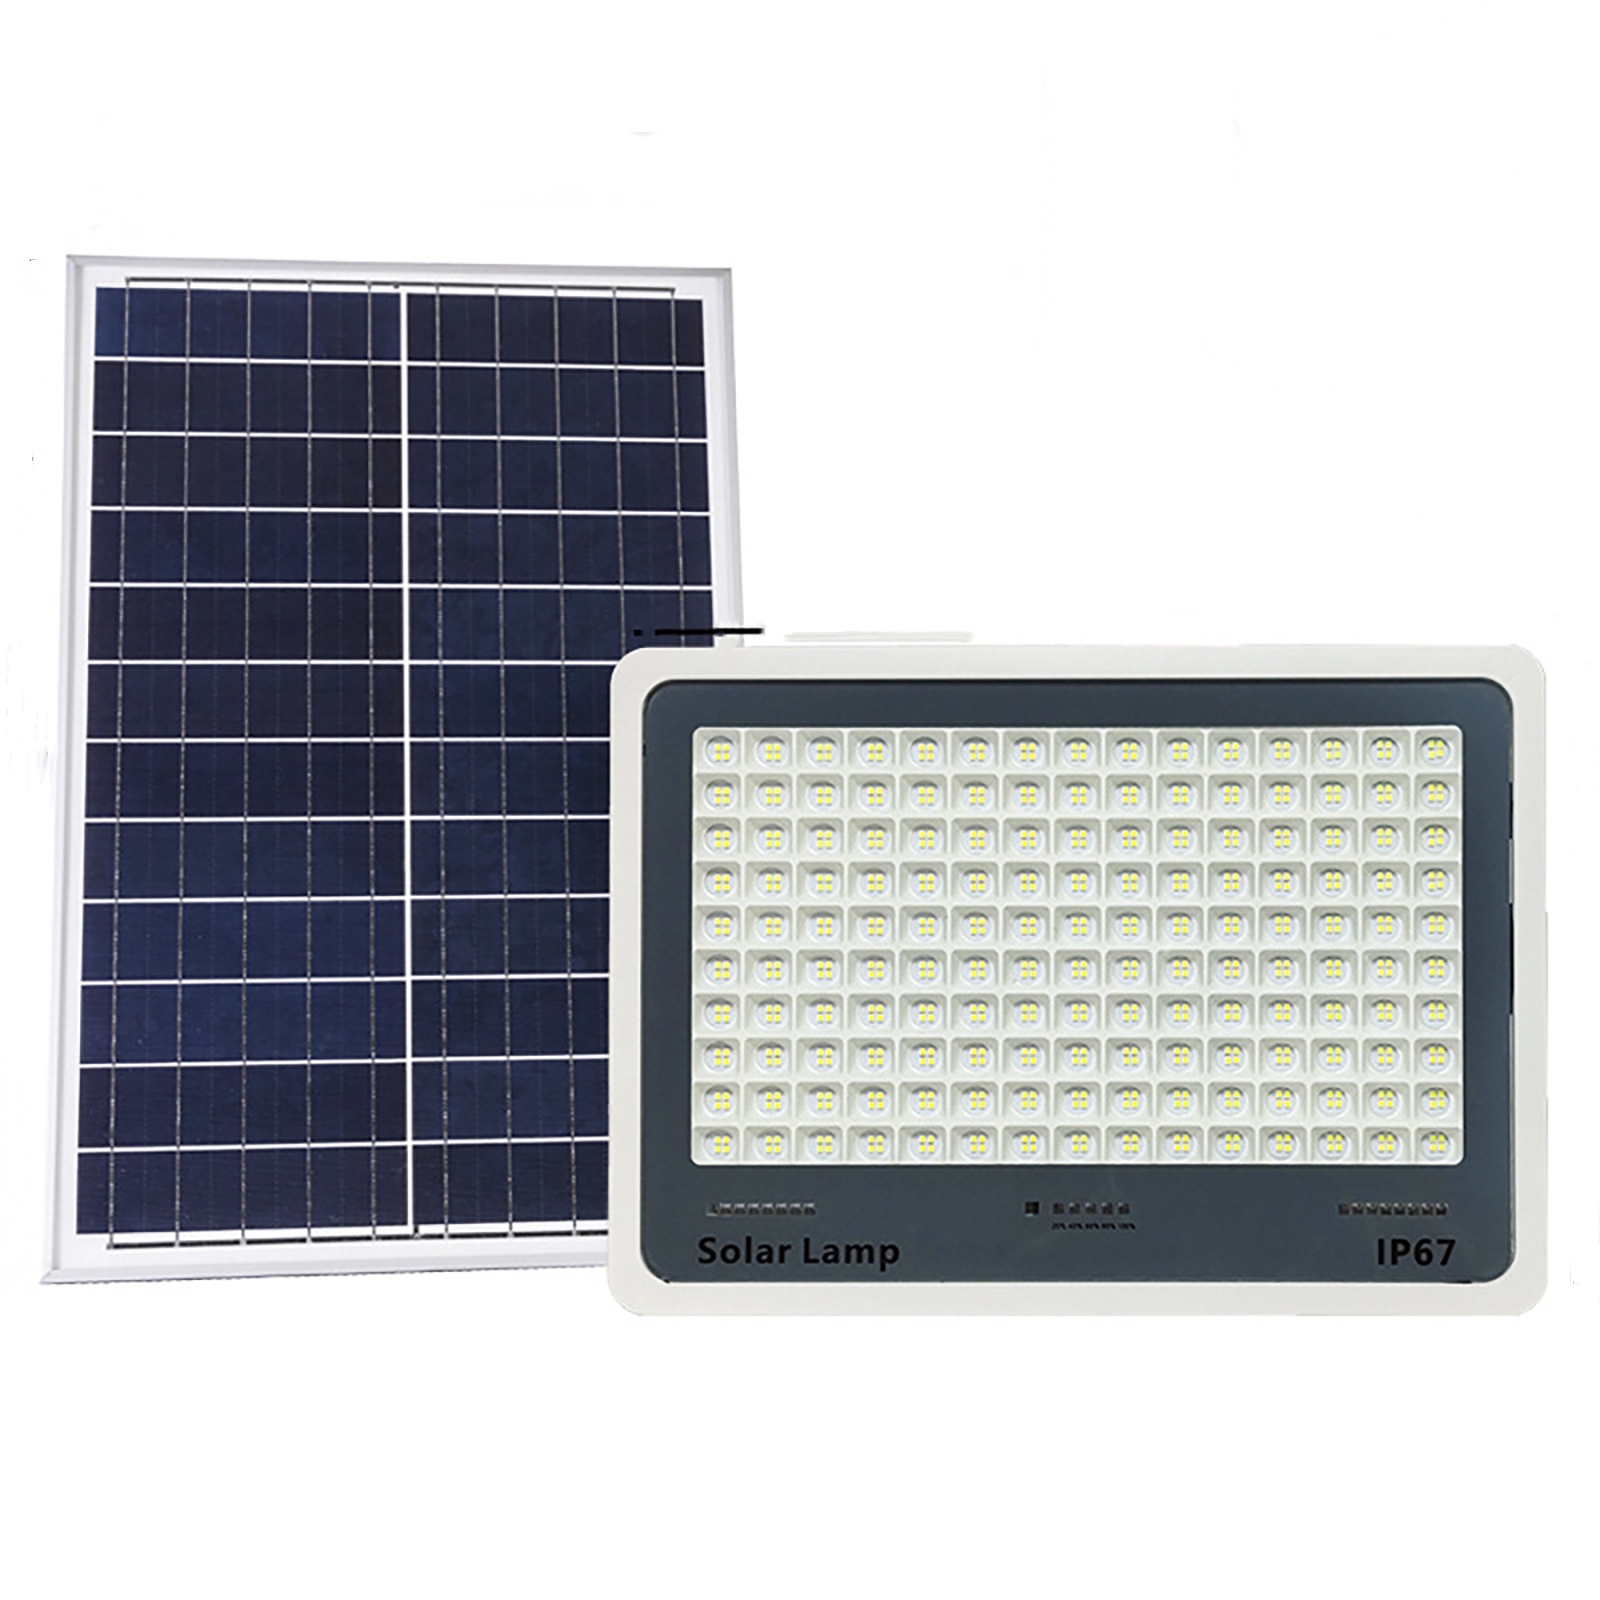 LED Outdoor Solar Light With Remote Control Outdoor Waterproof High Power Ultra Bright Floodlights For Patio Garage Backyard